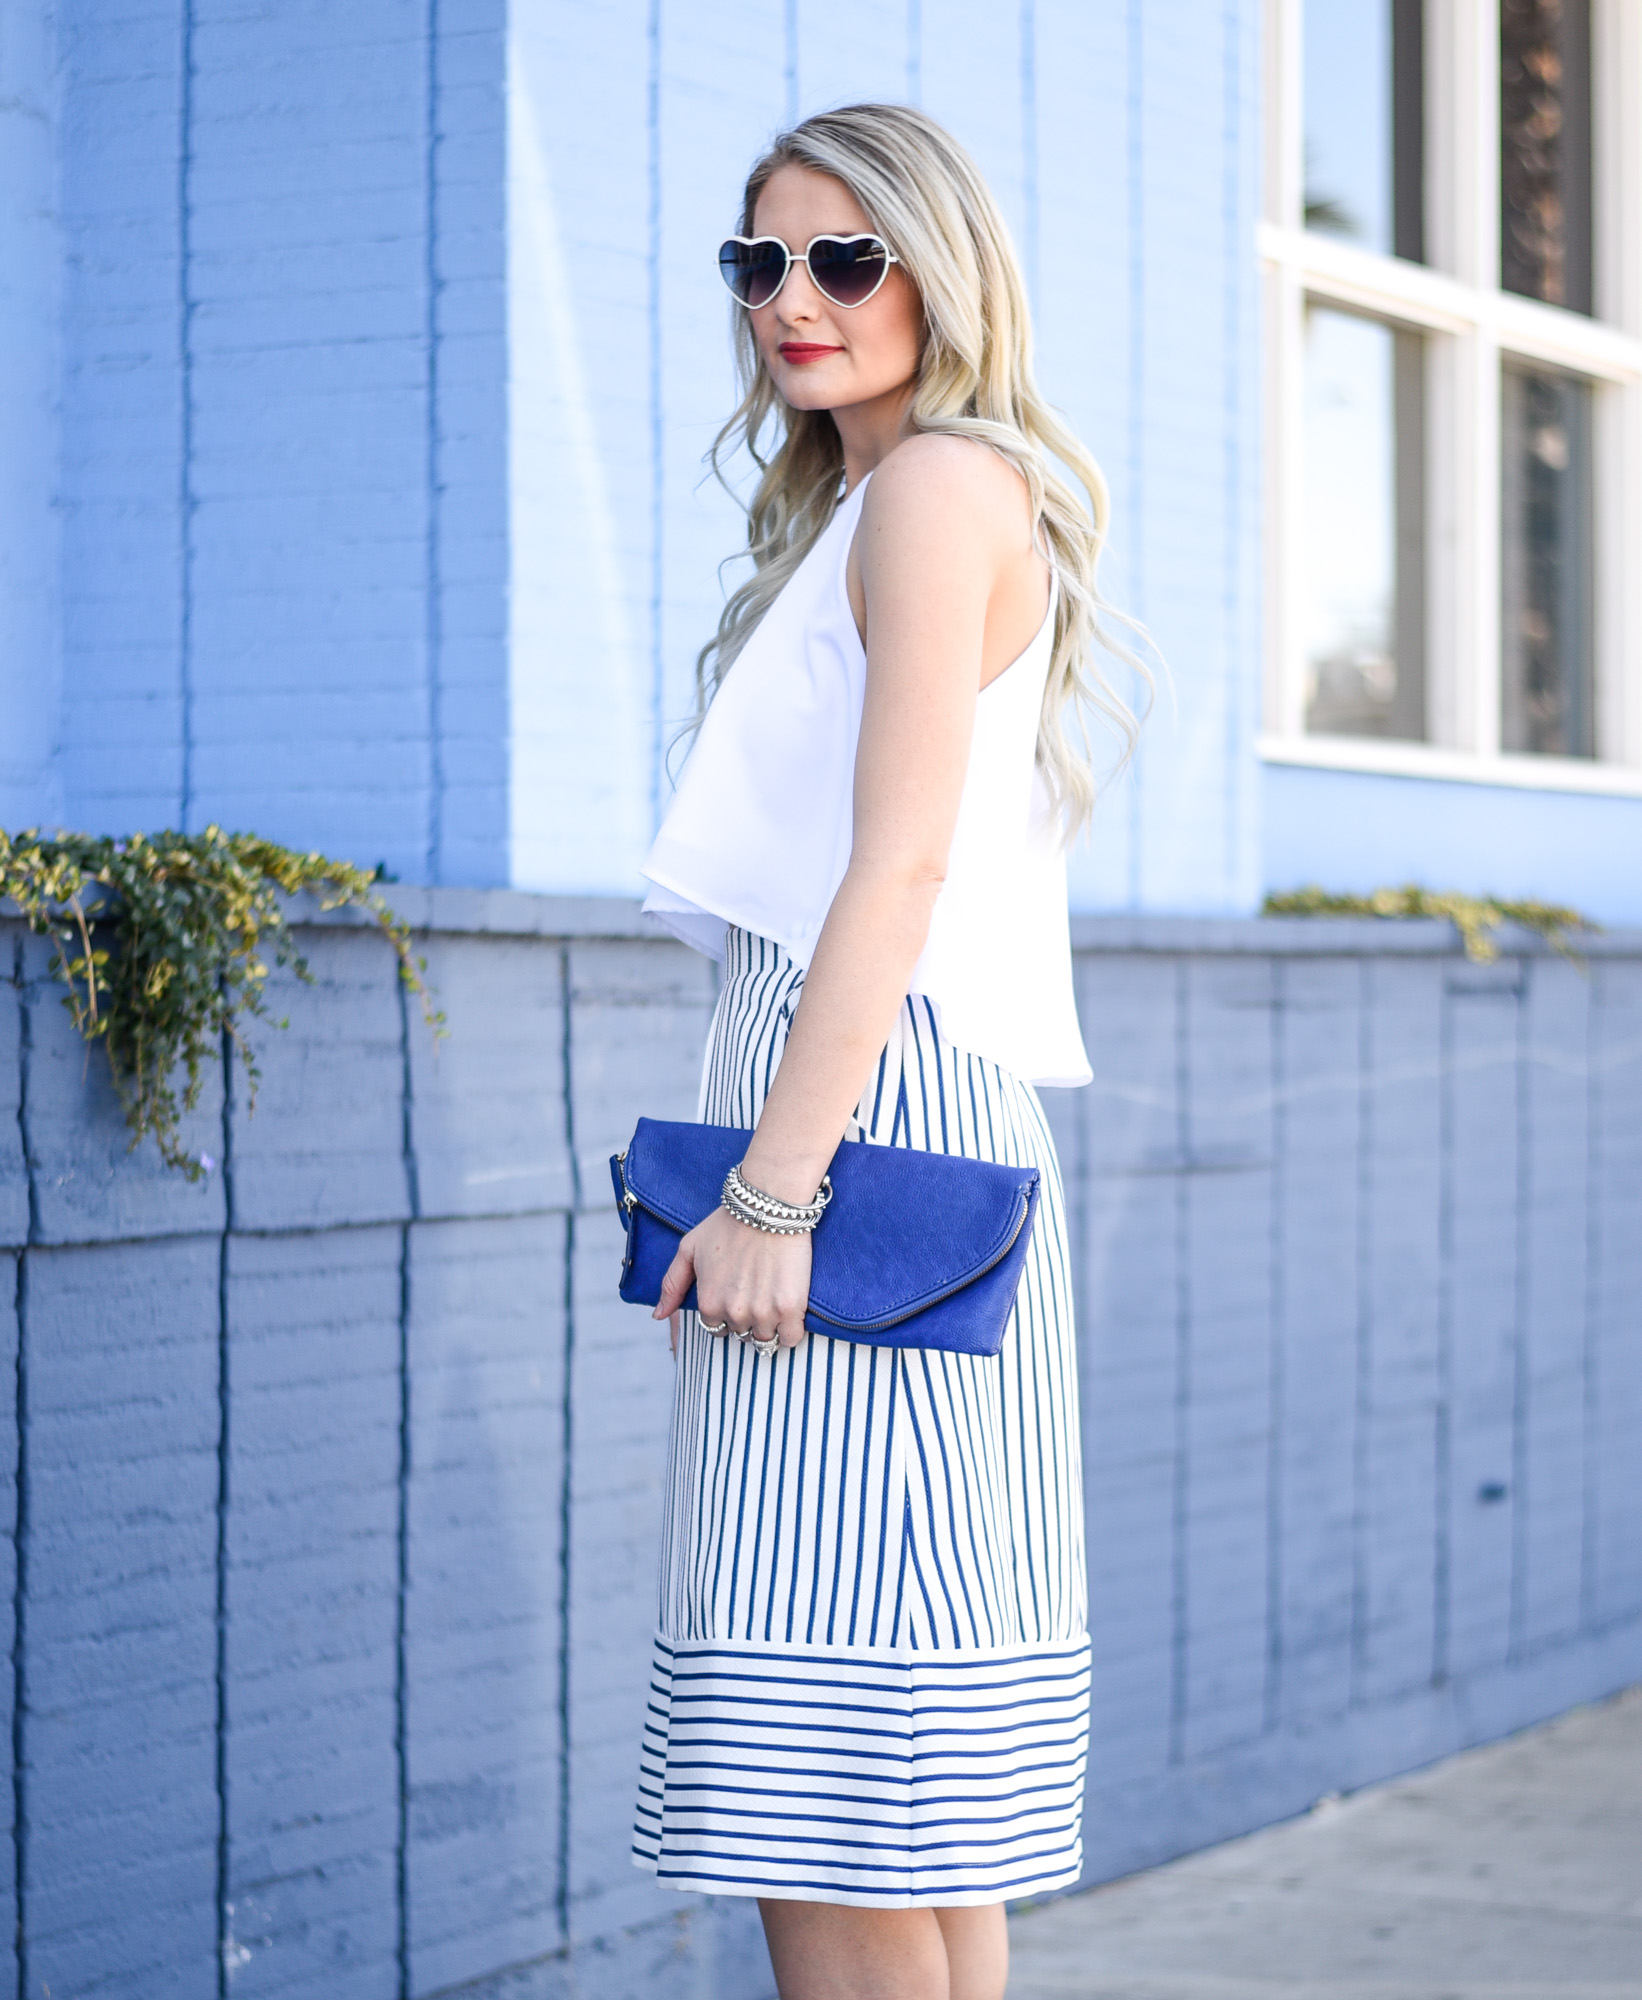 royal blue clutch for a pop of color 